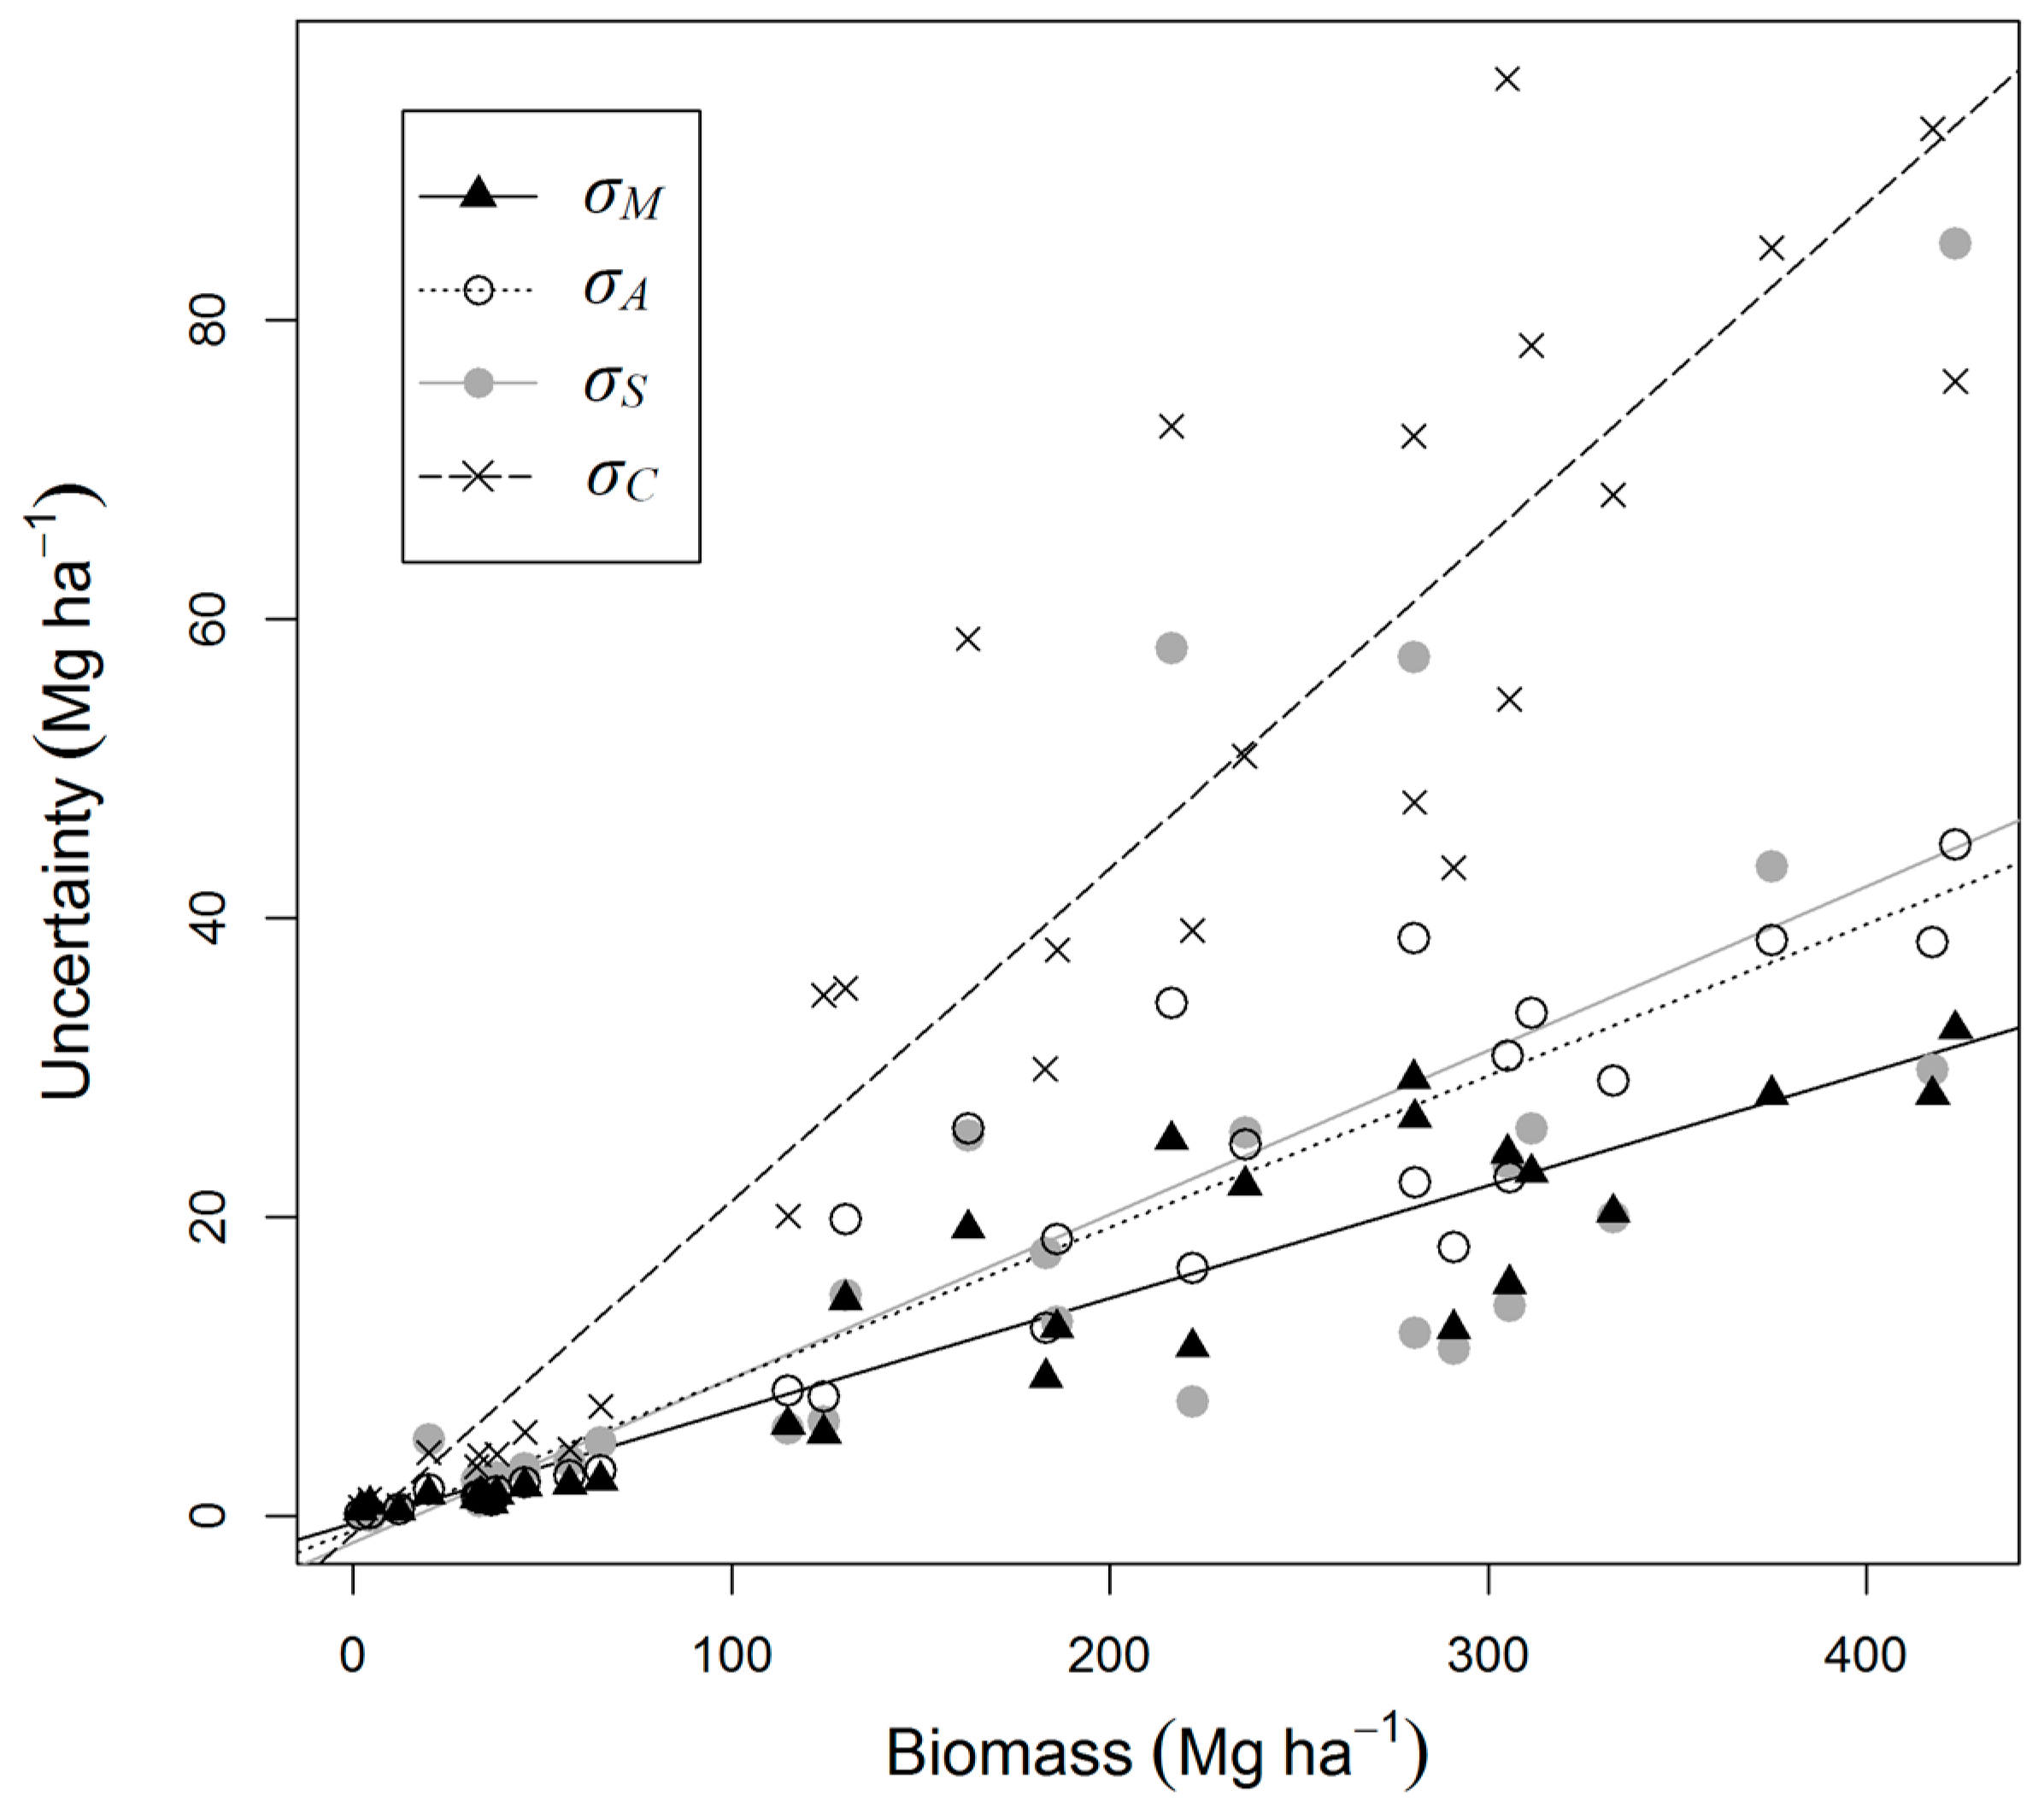 Remote Sensing | Free Full-Text | Estimating Aboveground Biomass in  Tropical Forests: Field Methods and Error Analysis for the Calibration of  Remote Sensing Observations | HTML